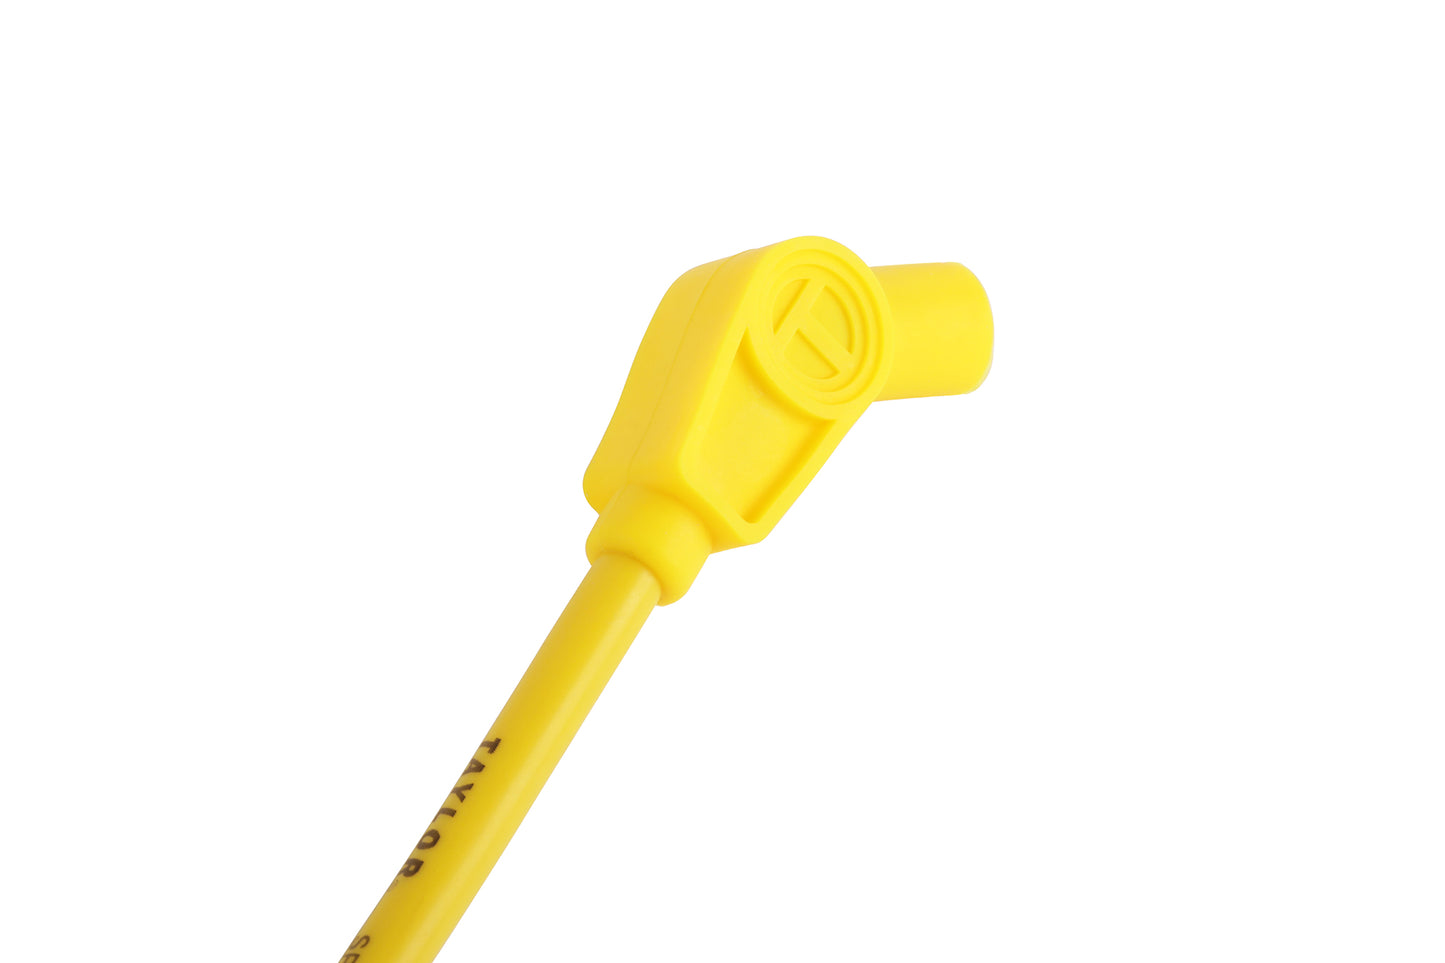 Taylor Cable 73453 8mm Spiro-Pro univ 8 cyl 135 Yellow